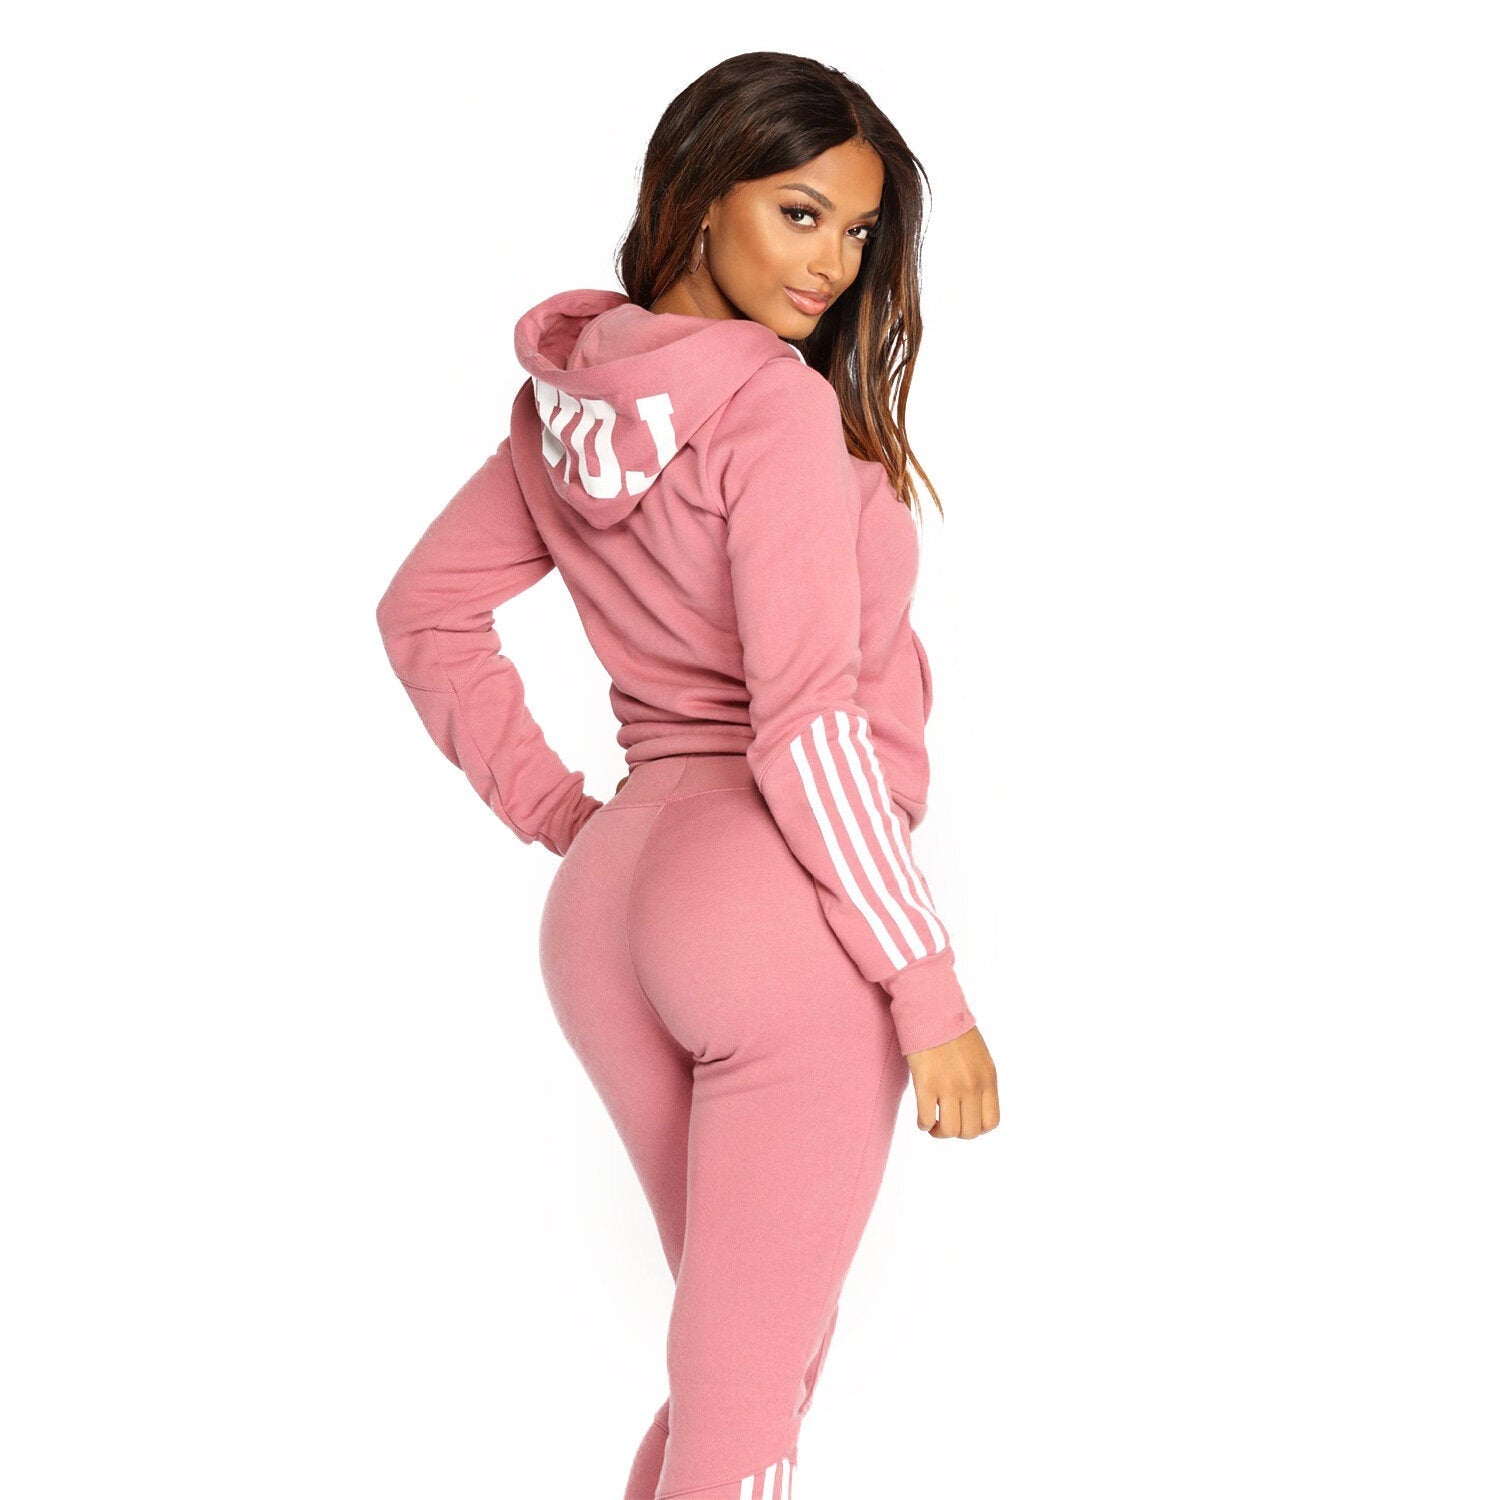 Zipper Sweatshirt Pants Two Piece Set Women Long Sleeve Stripe Hooded Tracksuit Cloth Blouse Pant Suit Fitness Running Outdoor Sports Clothings Set